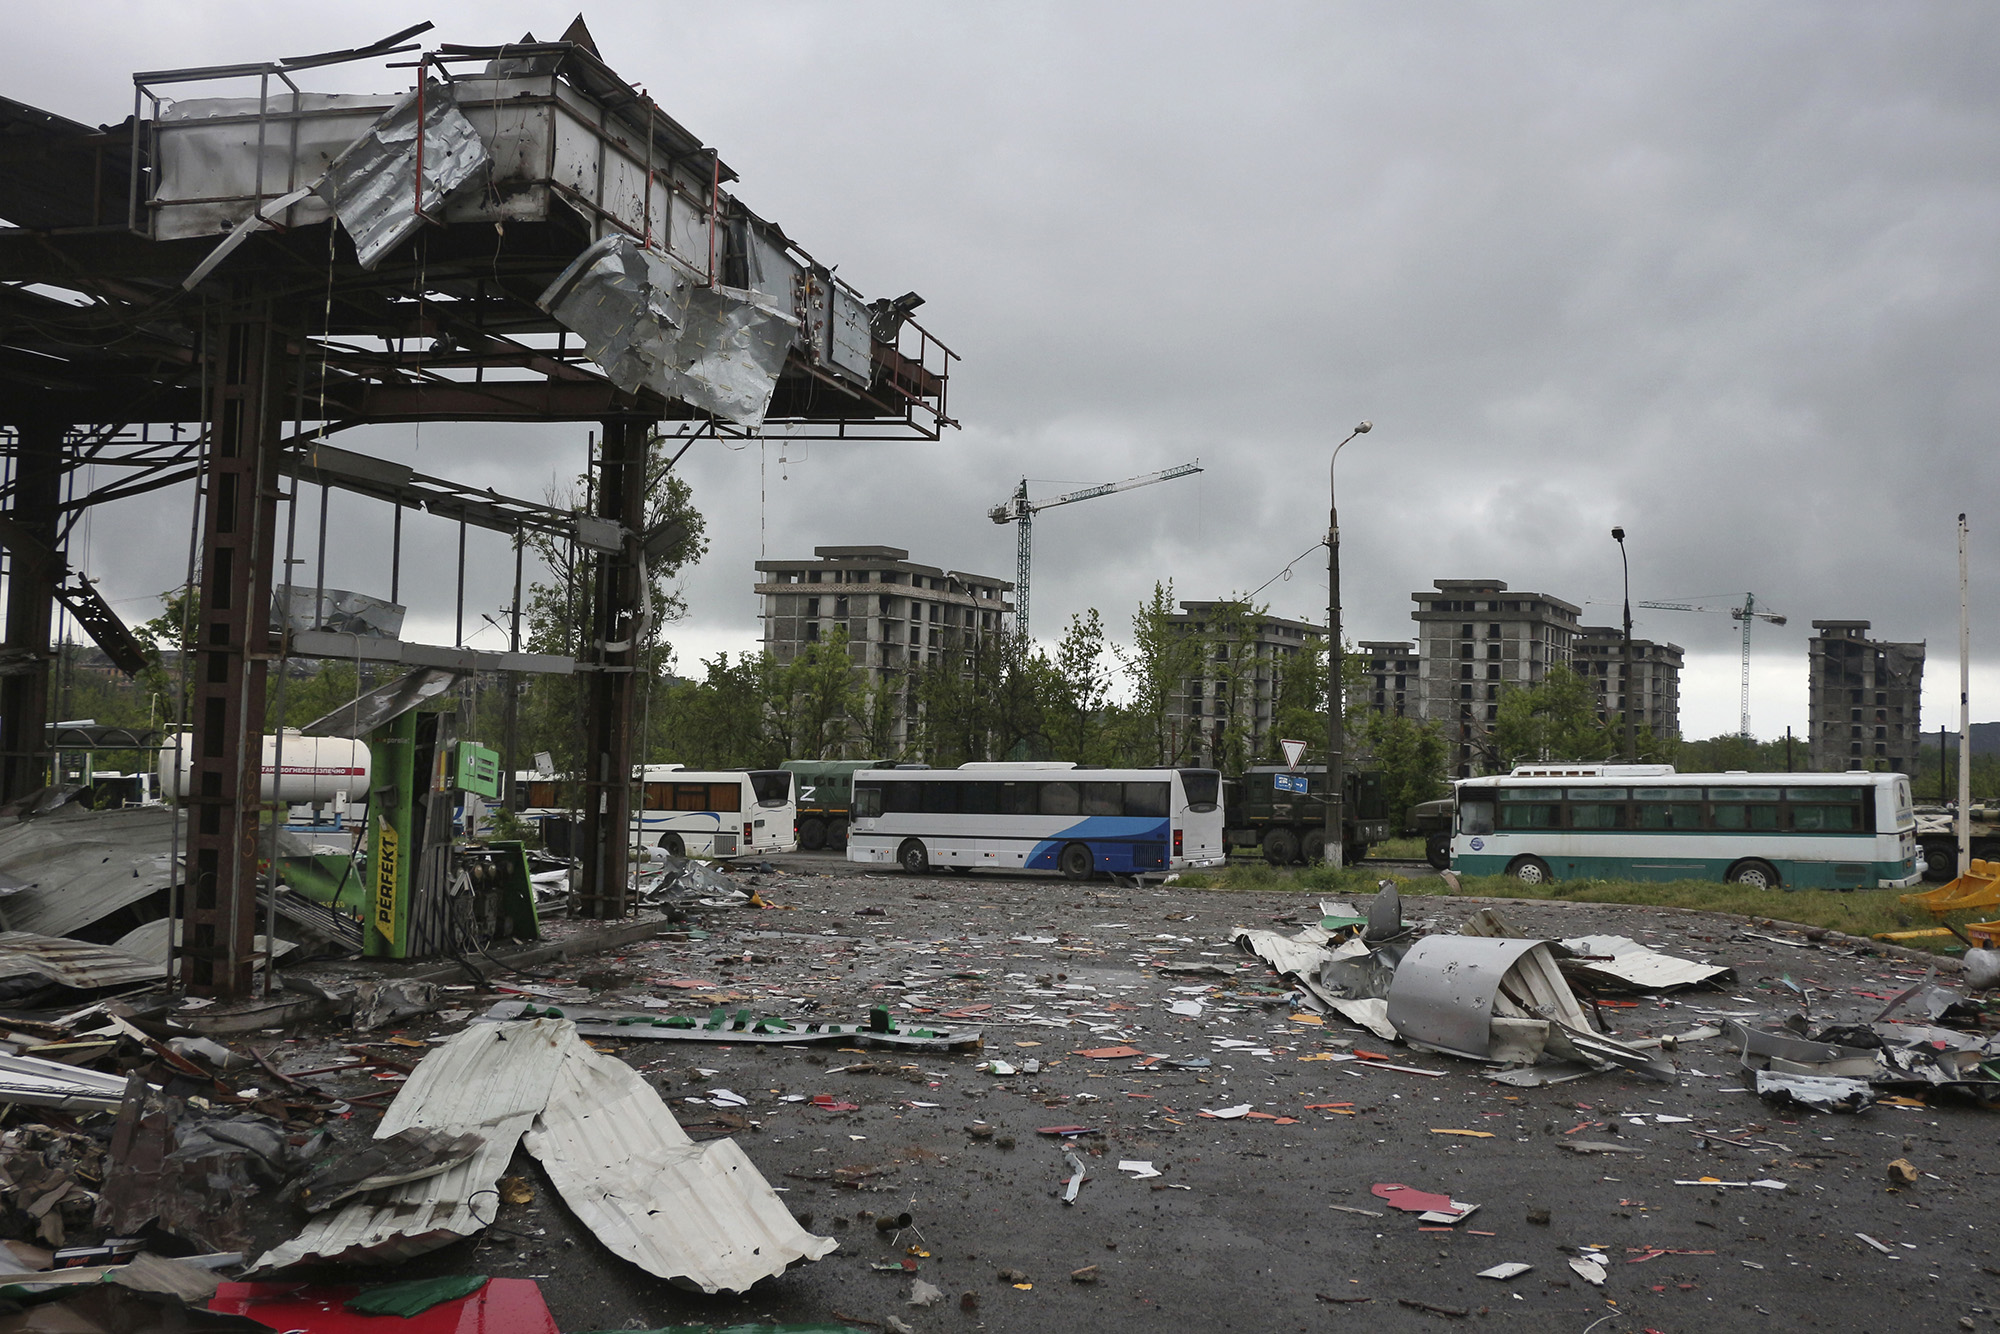 Buses wait for Ukrainian servicemen to transport them from Mariupol to a prison in Olyonivka, Ukraine, on May 18.